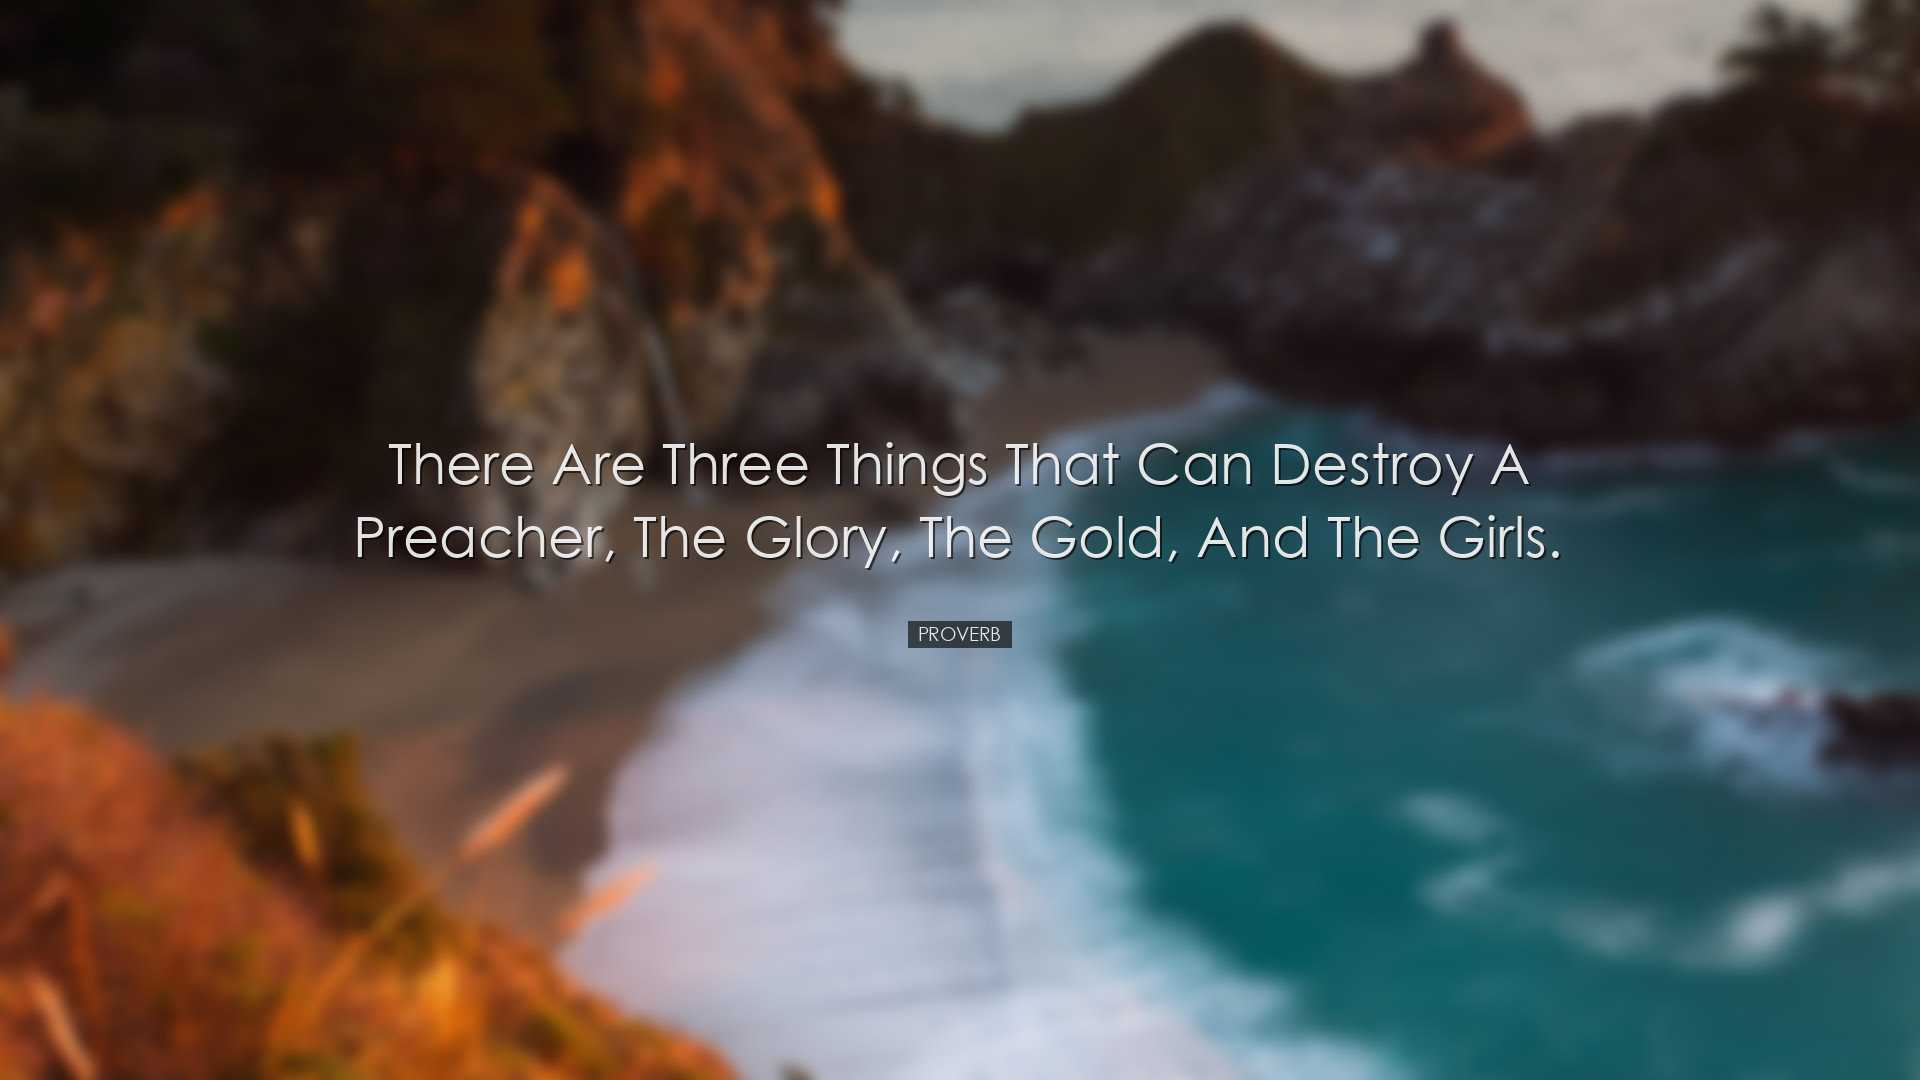 There are three things that can destroy a preacher, the glory, the